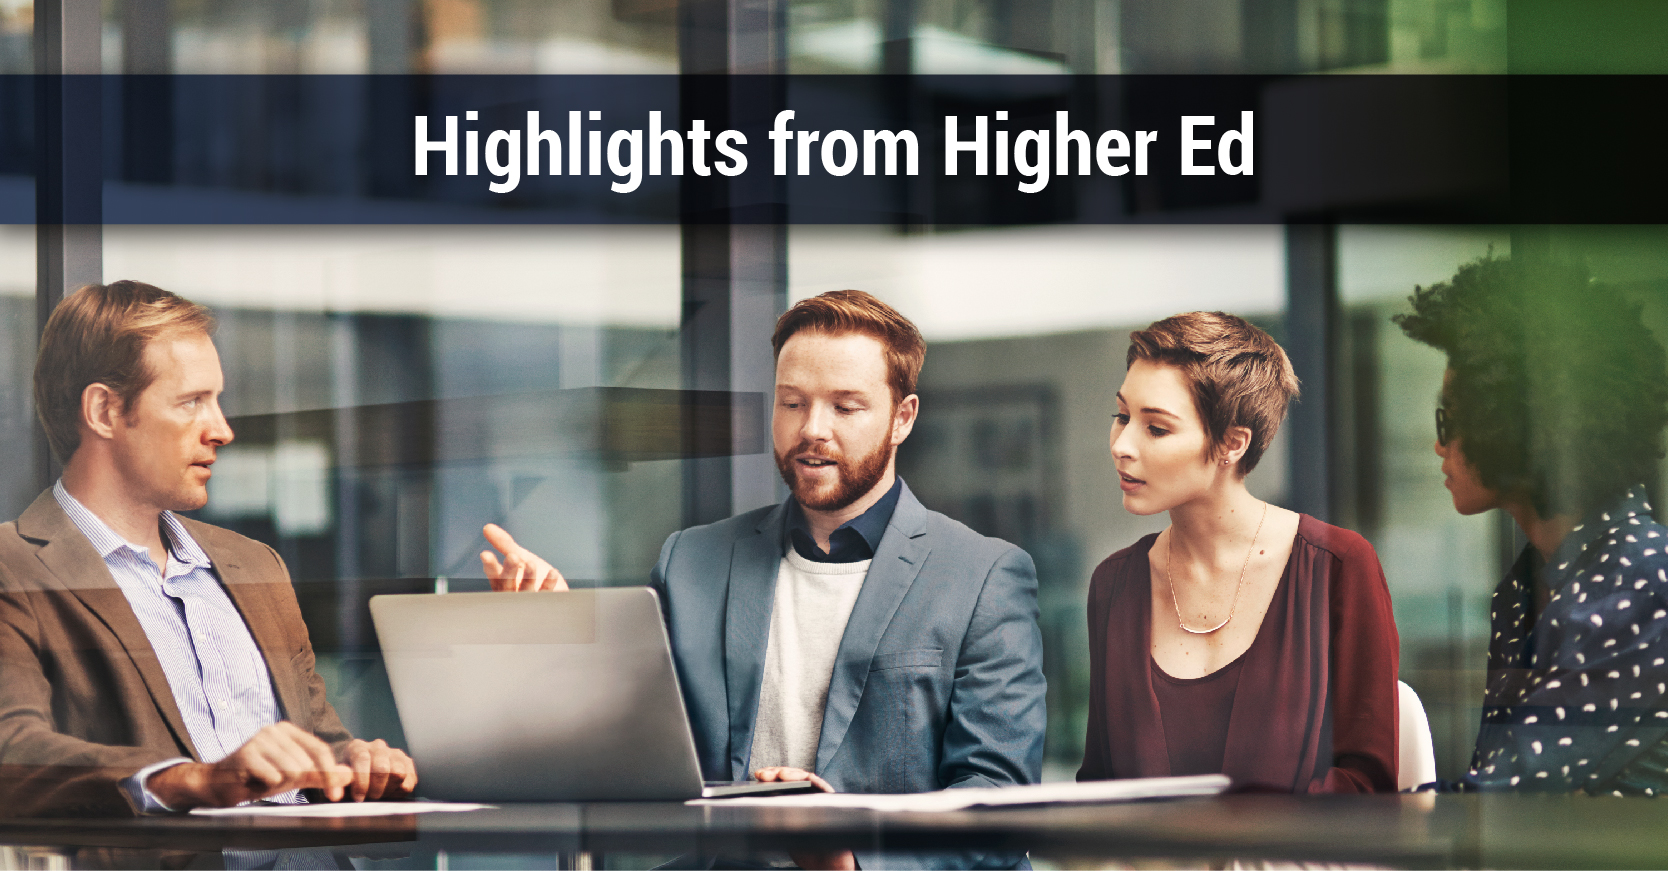 Higher-Ed Brain Drain, Employers’ Hiring Preferences, Taking on Debt, and 10-Year Bachelor’s Degree Trends 